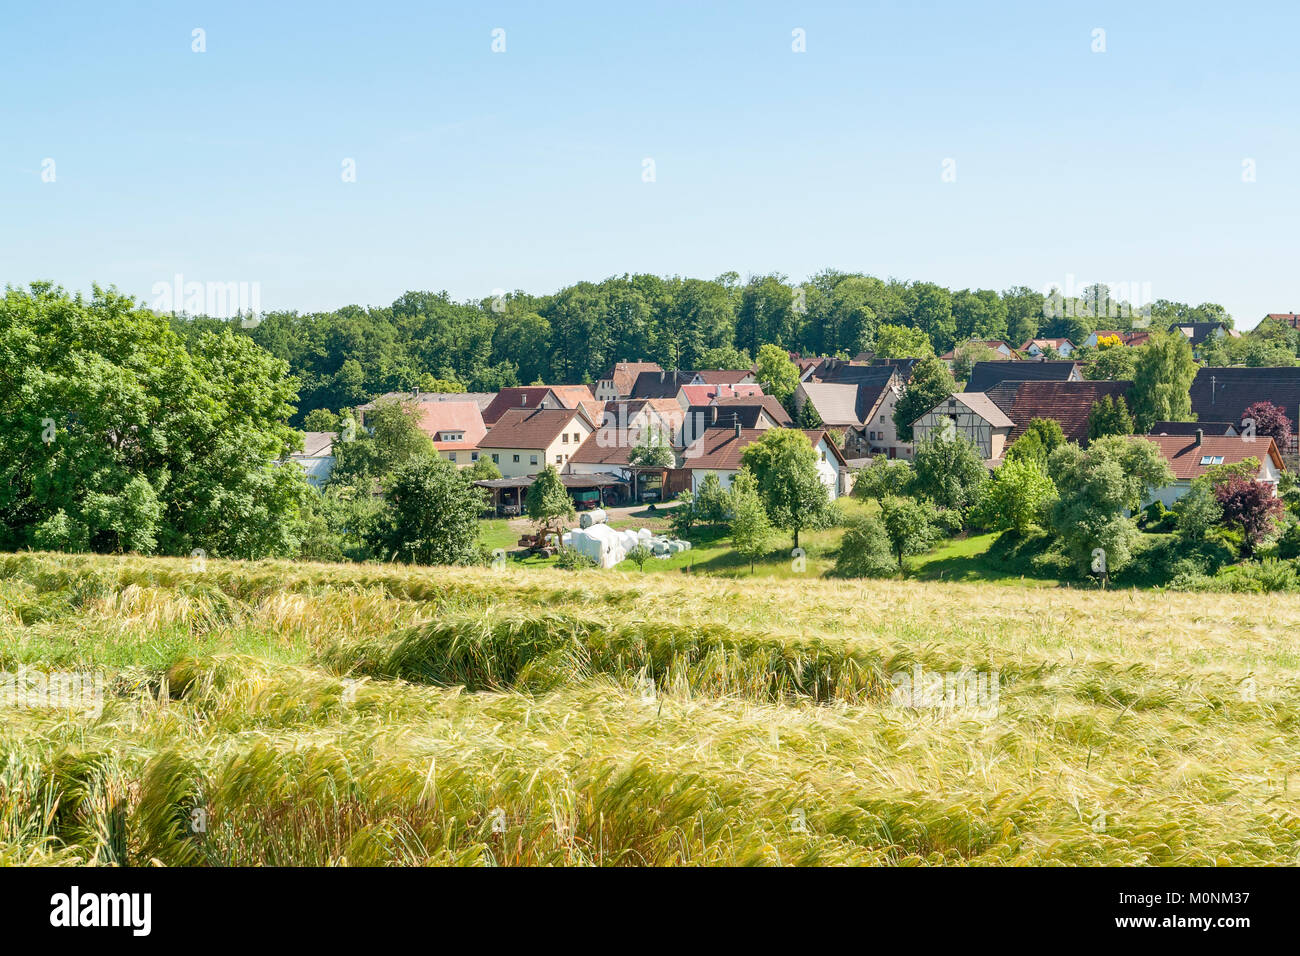 idyllic rural village named Schleierhof located in the Hohenlohe district in Southern Germany at summer time Stock Photo